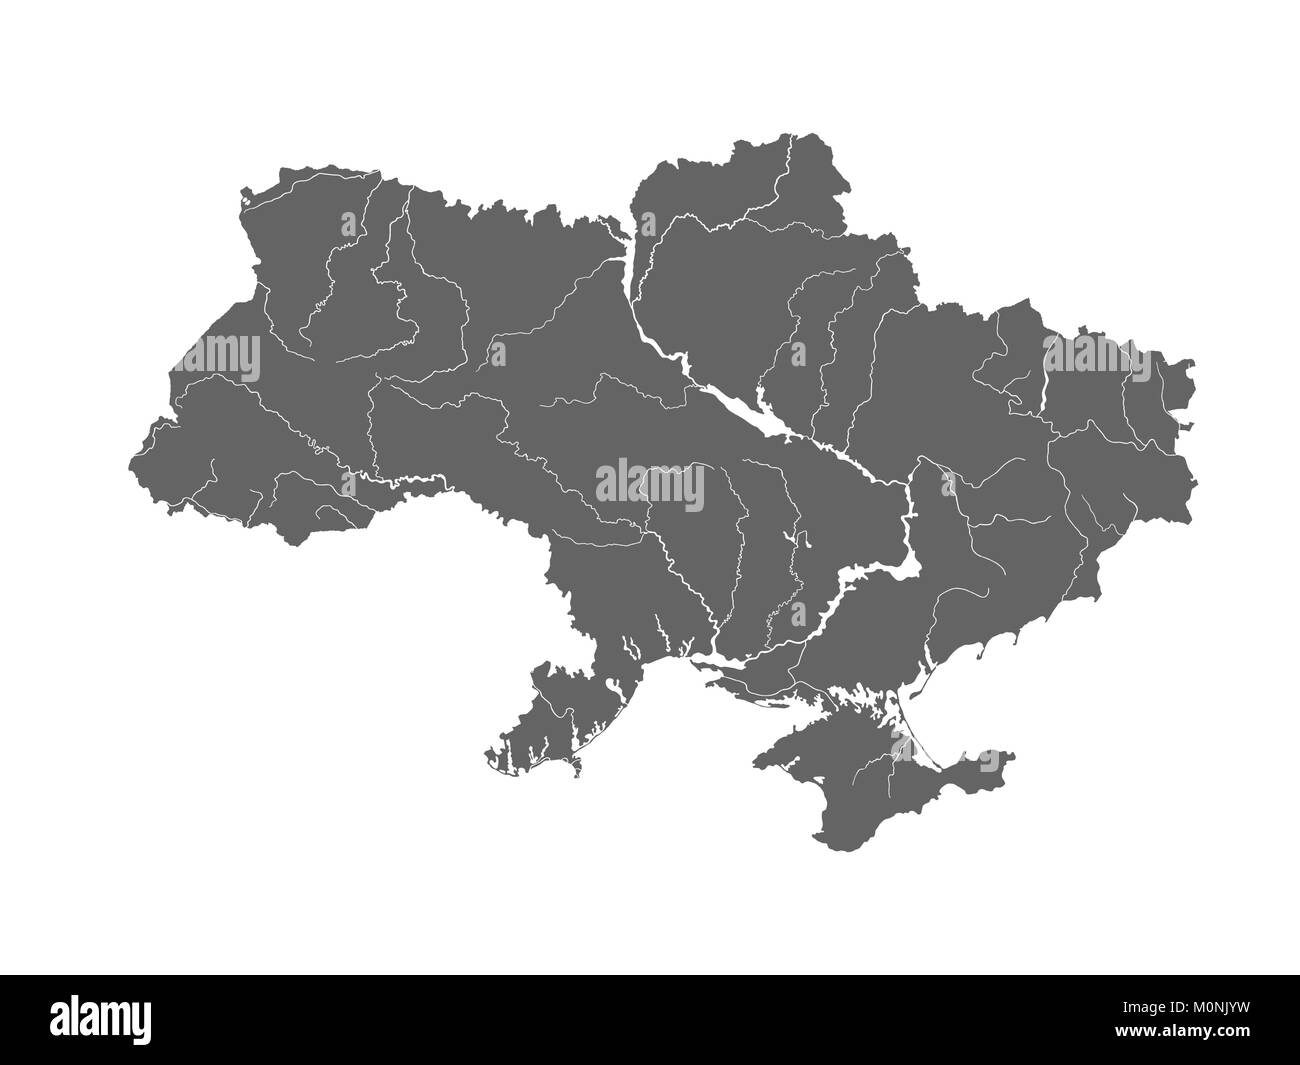 Map of Ukraine in gray color. Rivers are shown. Stock Vector